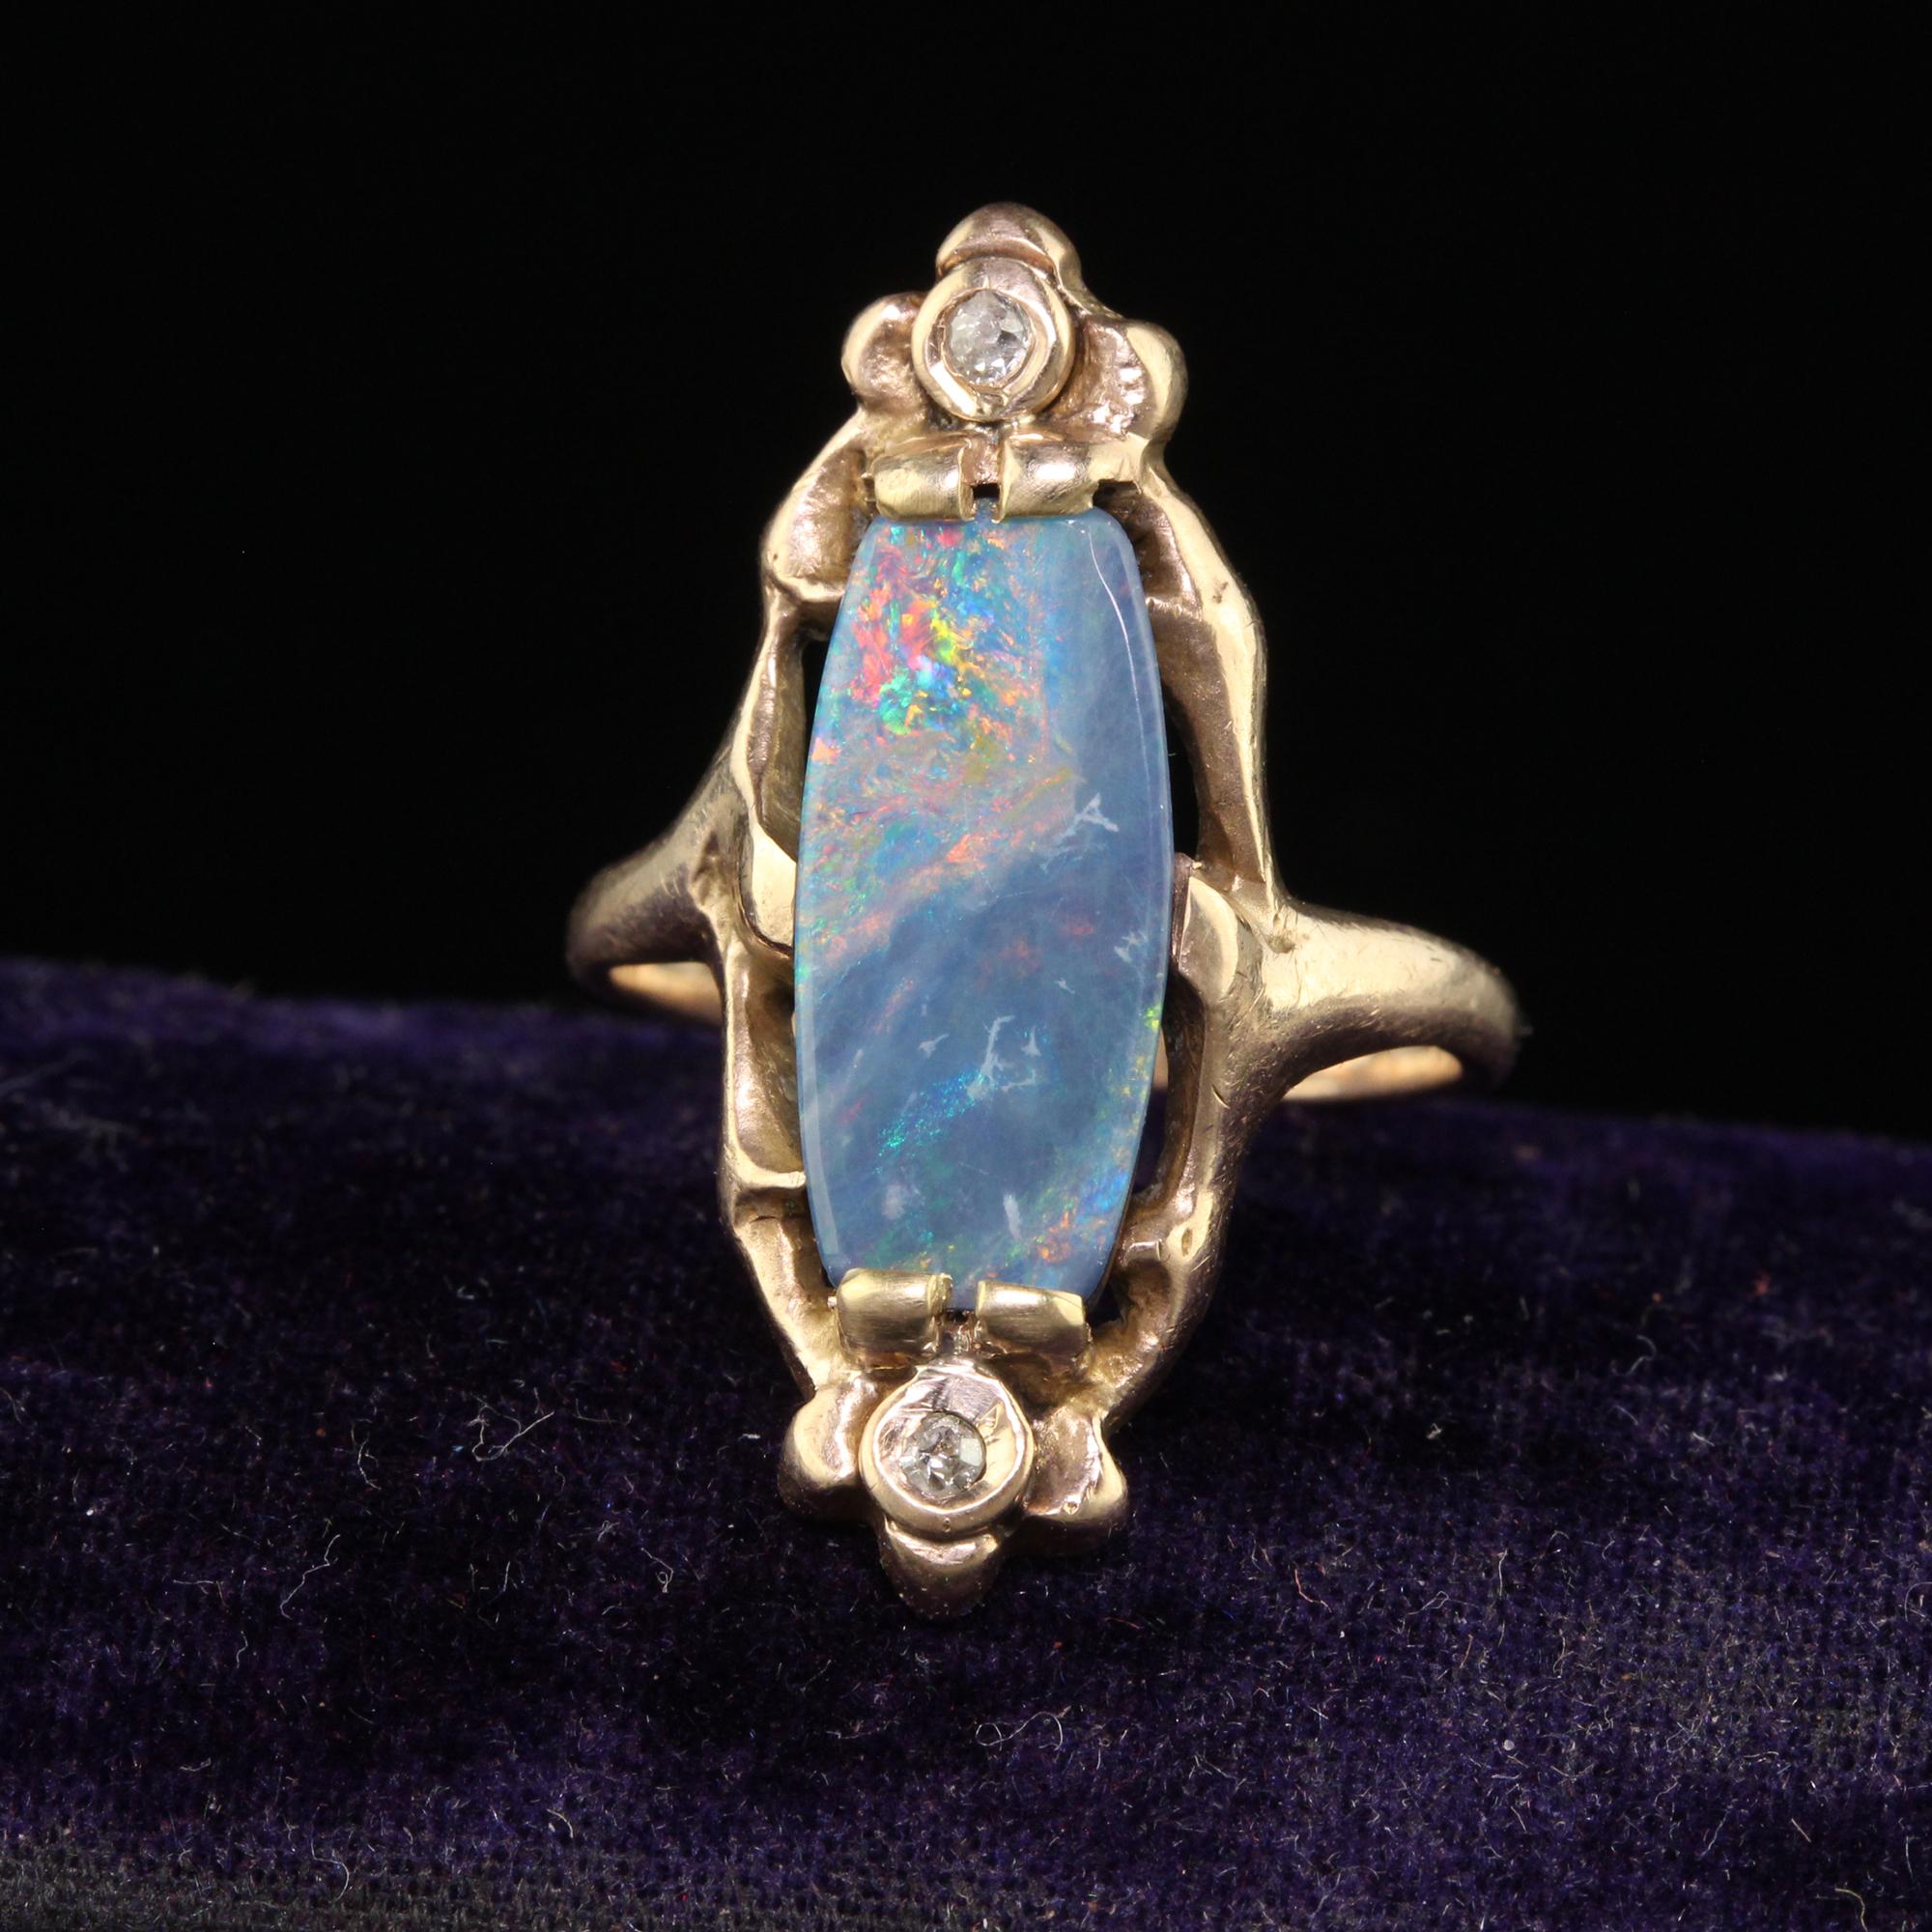 Beautiful Antique Art Nouveau 10K Rose Gold Boulder Opal Diamond Floral Ring. This beautiful ring is crafted in 10k rose gold. The center holds a gorgeous Australian boulder opal that has flashes of green, yellow, red, and blue. There are single cut